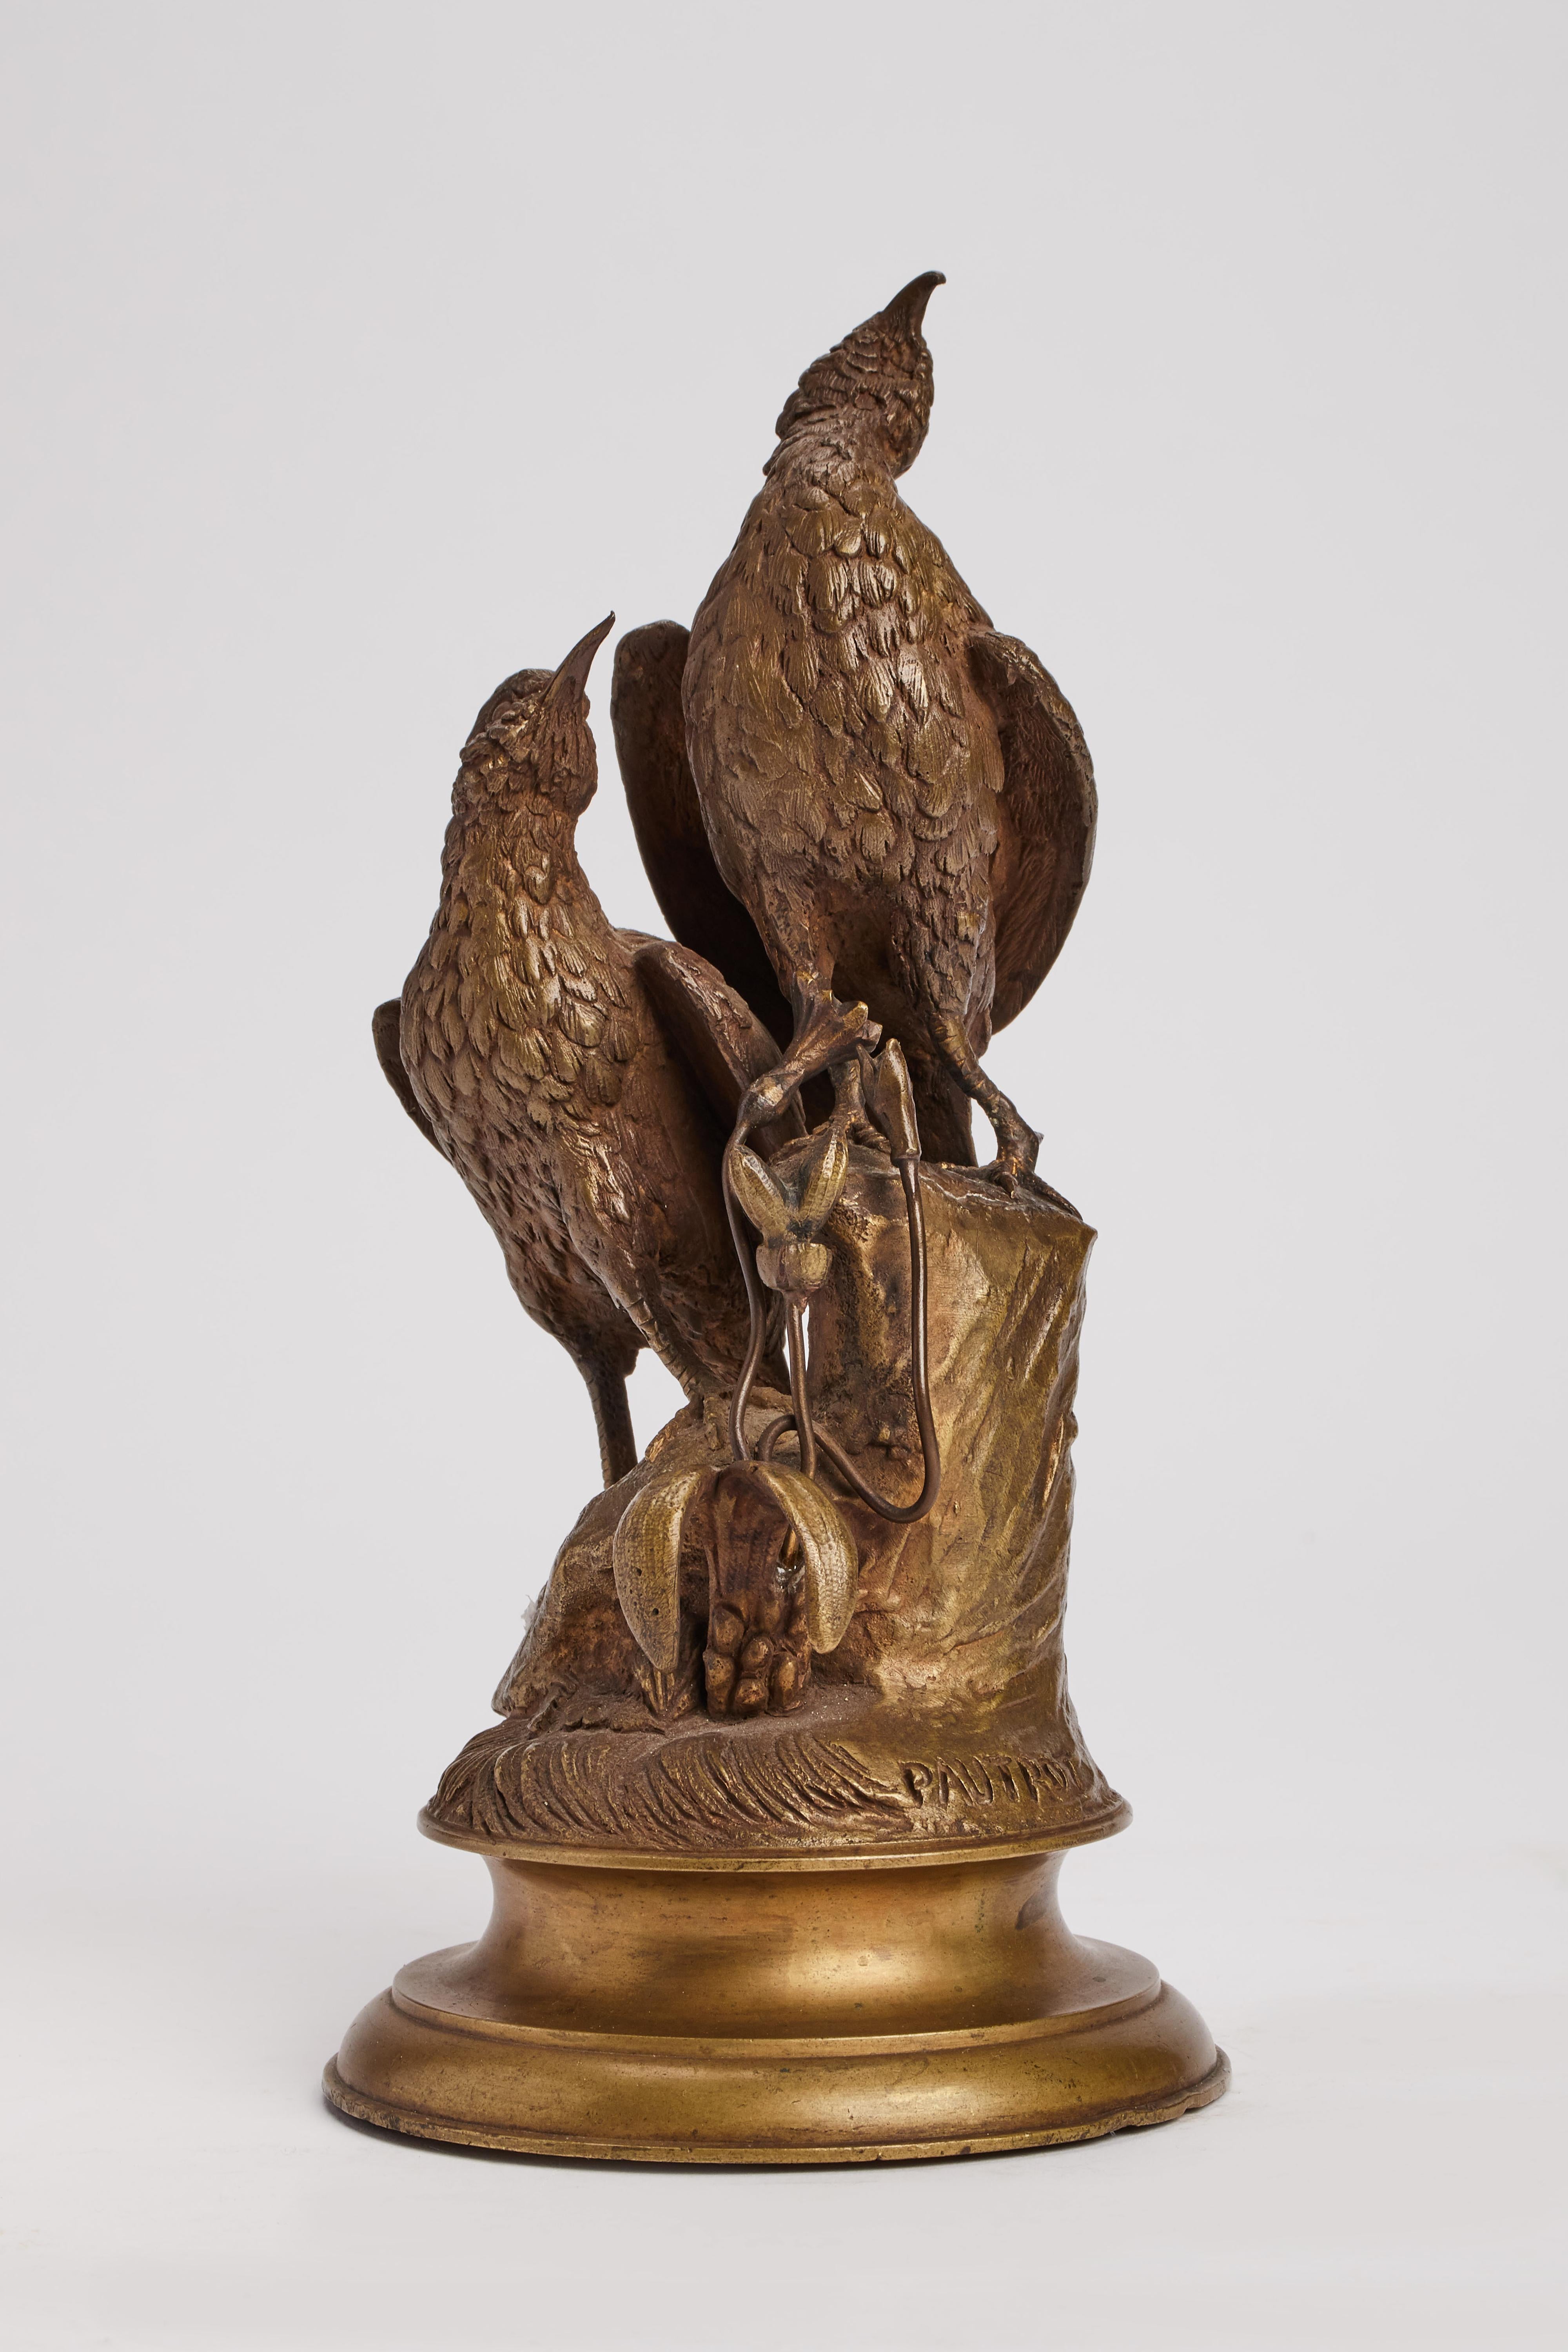 A bronze gilt sculpture of birds are standing over a tree trunk decorated with leaves and flowers. Round plane base. Signed Pautrot, France, circa 1850